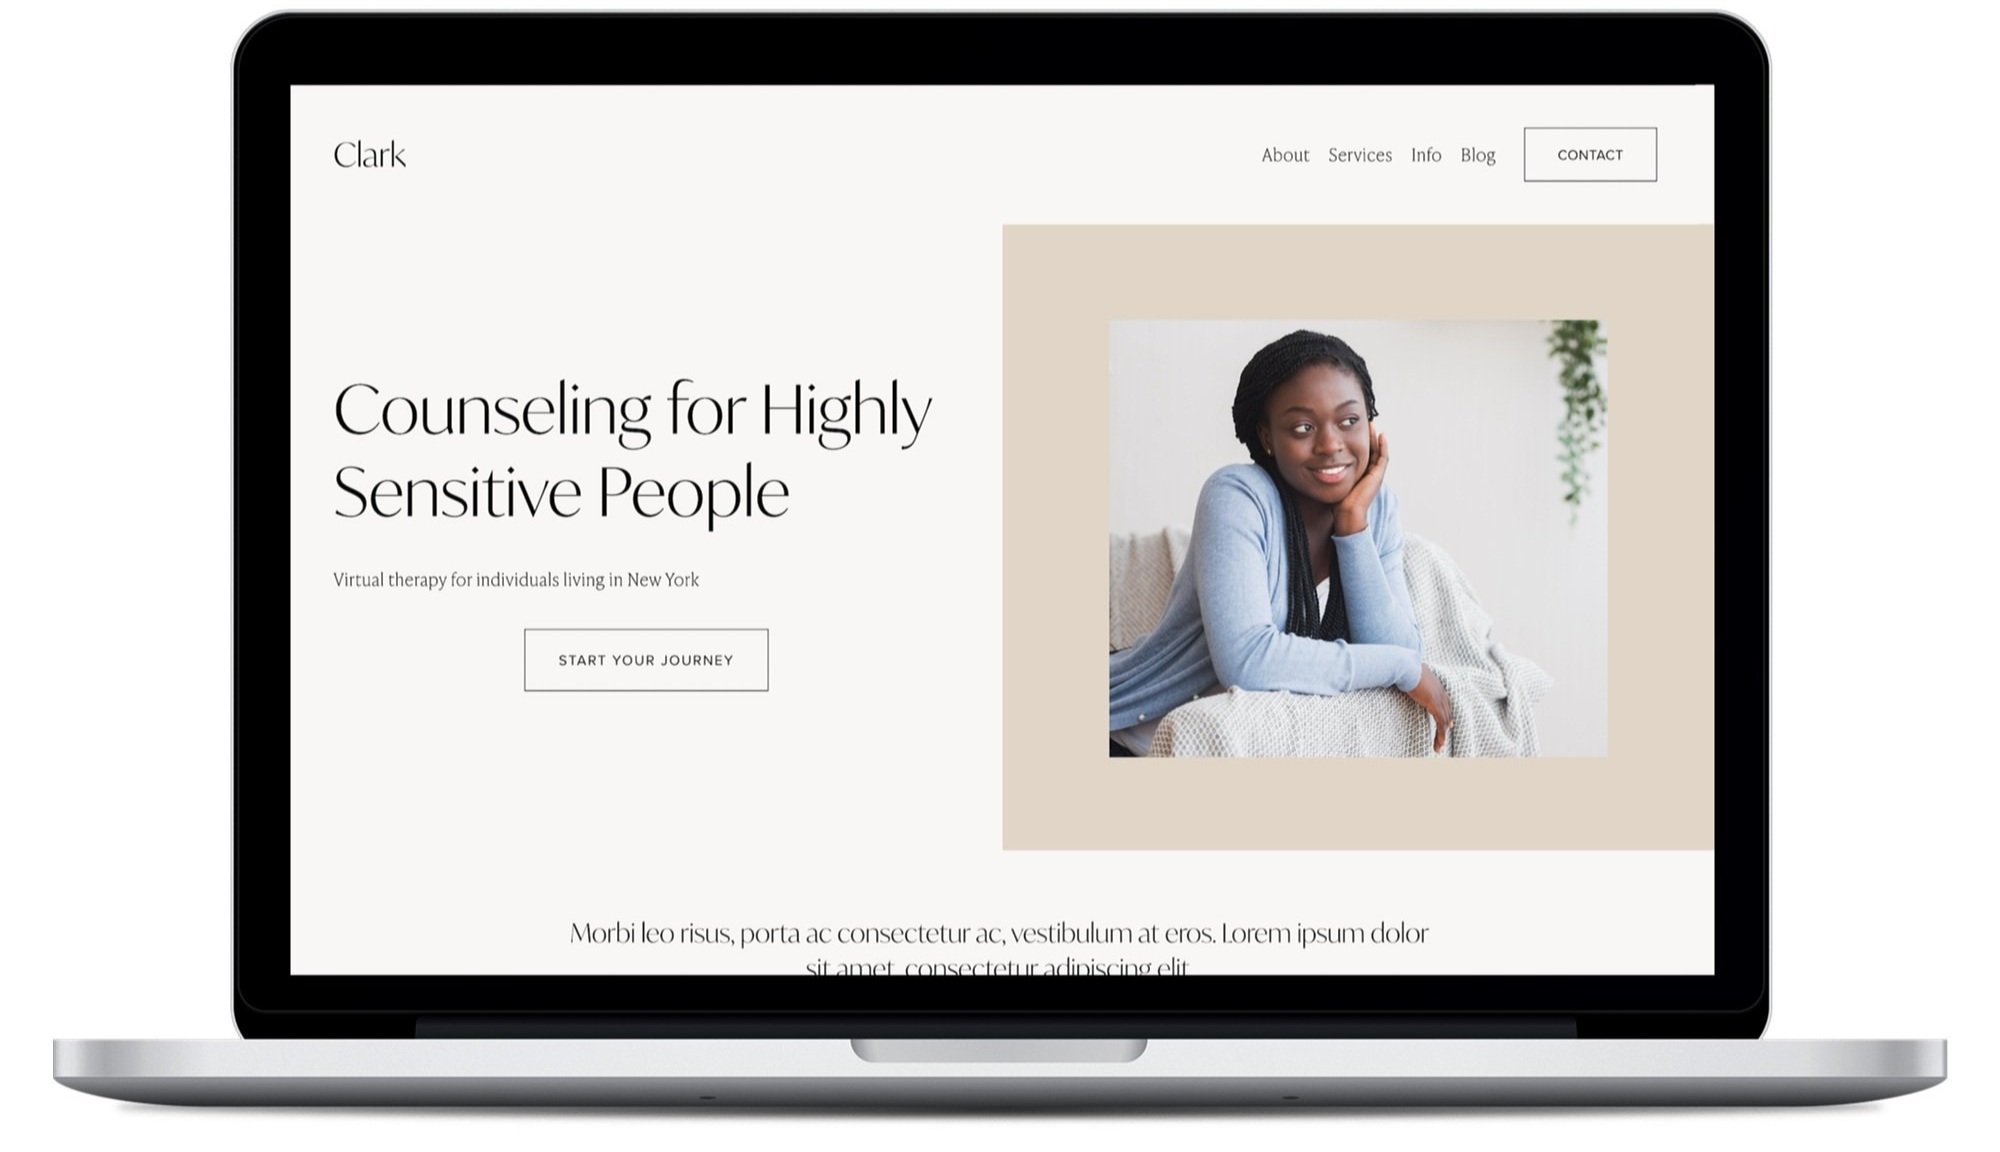 squarespace-templates-for-therapists-therapist-site-toolbox